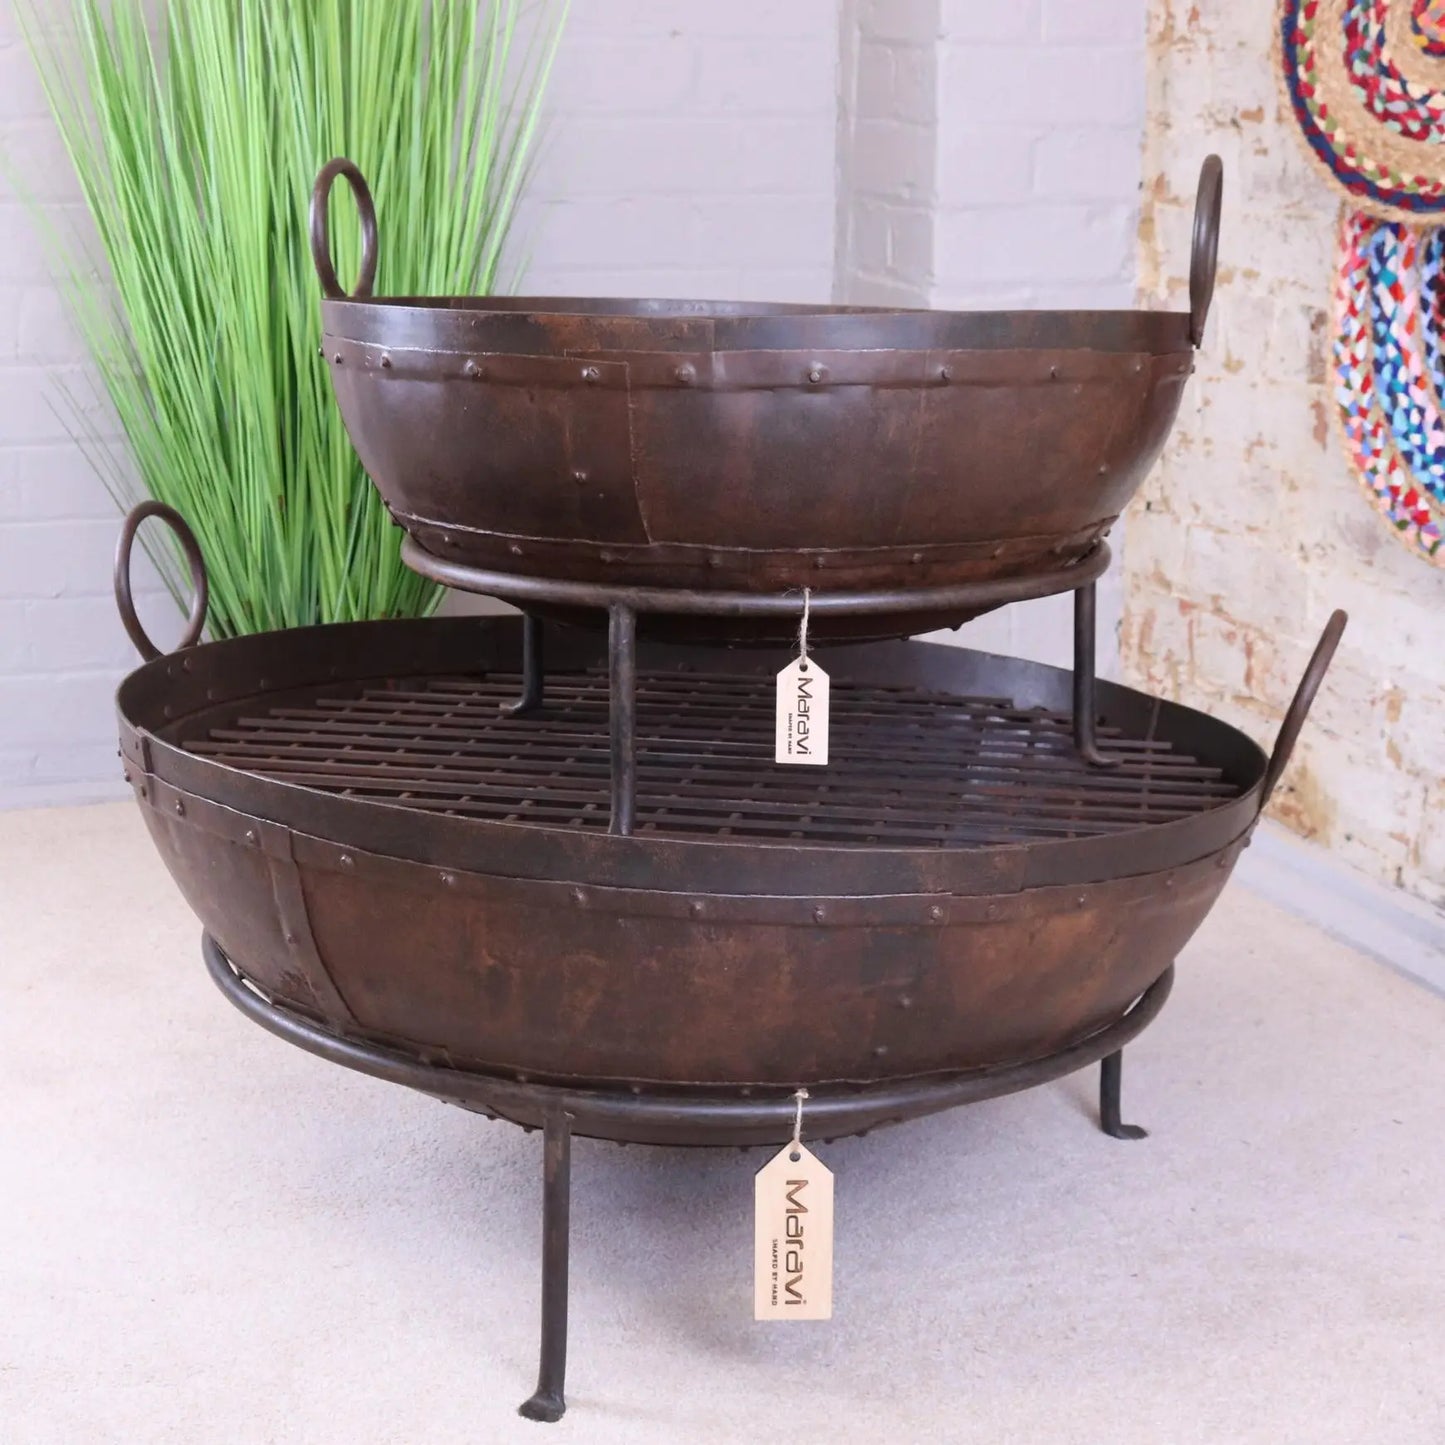 Vintage Kadai Bowl with Stand Garden Fire Pit Bowls Main Image